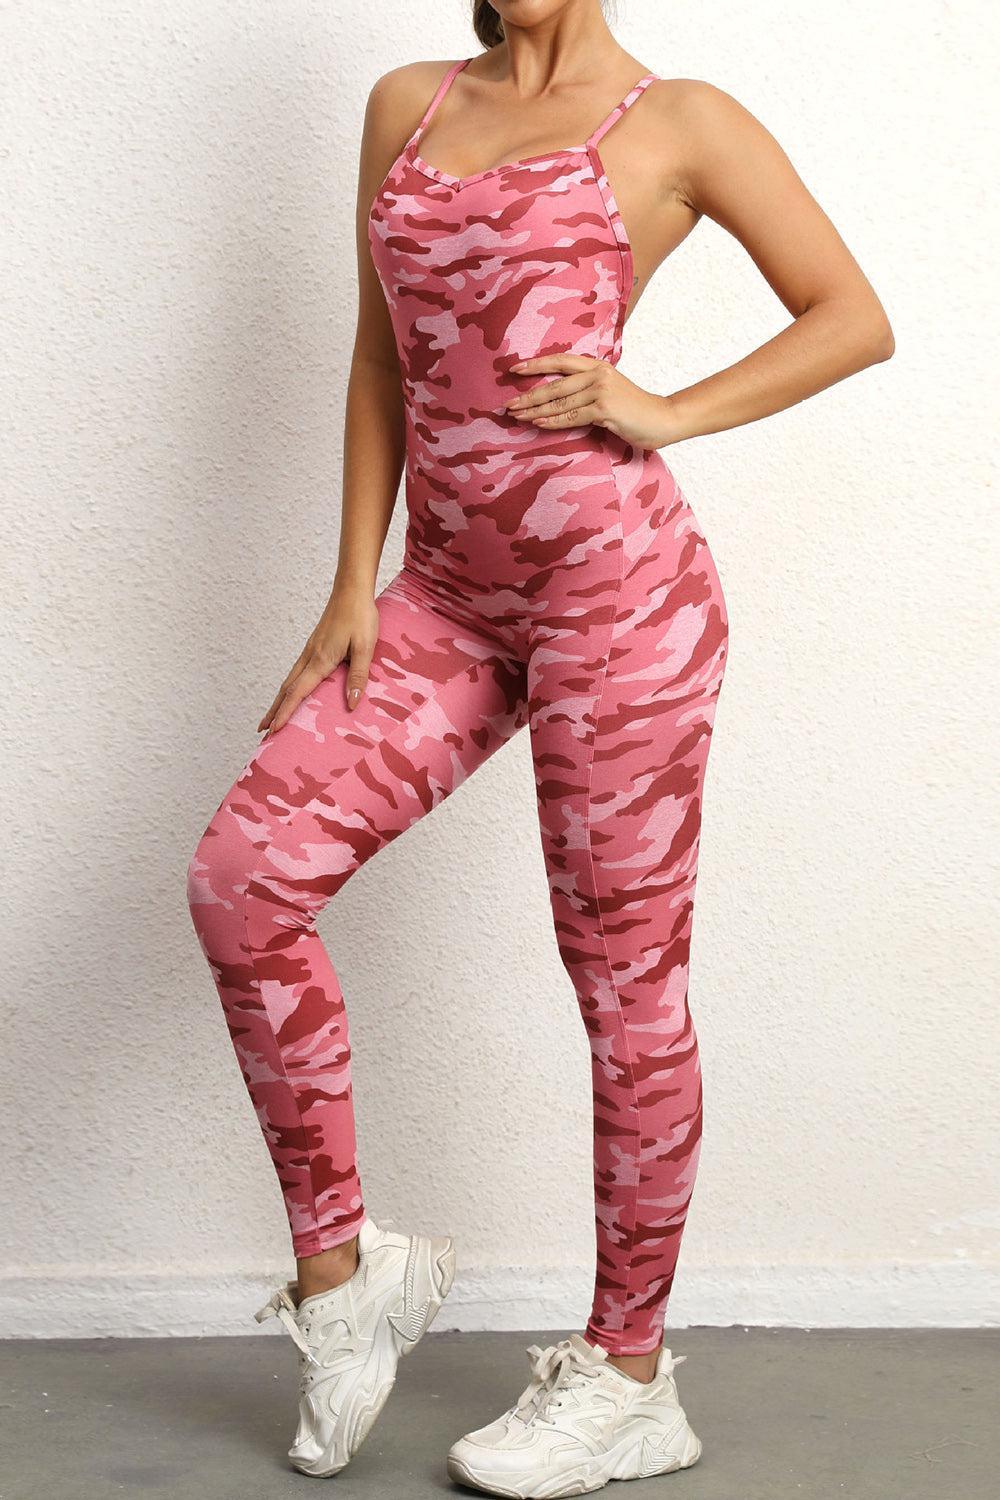 a woman in a pink camo sports bra top and leggings